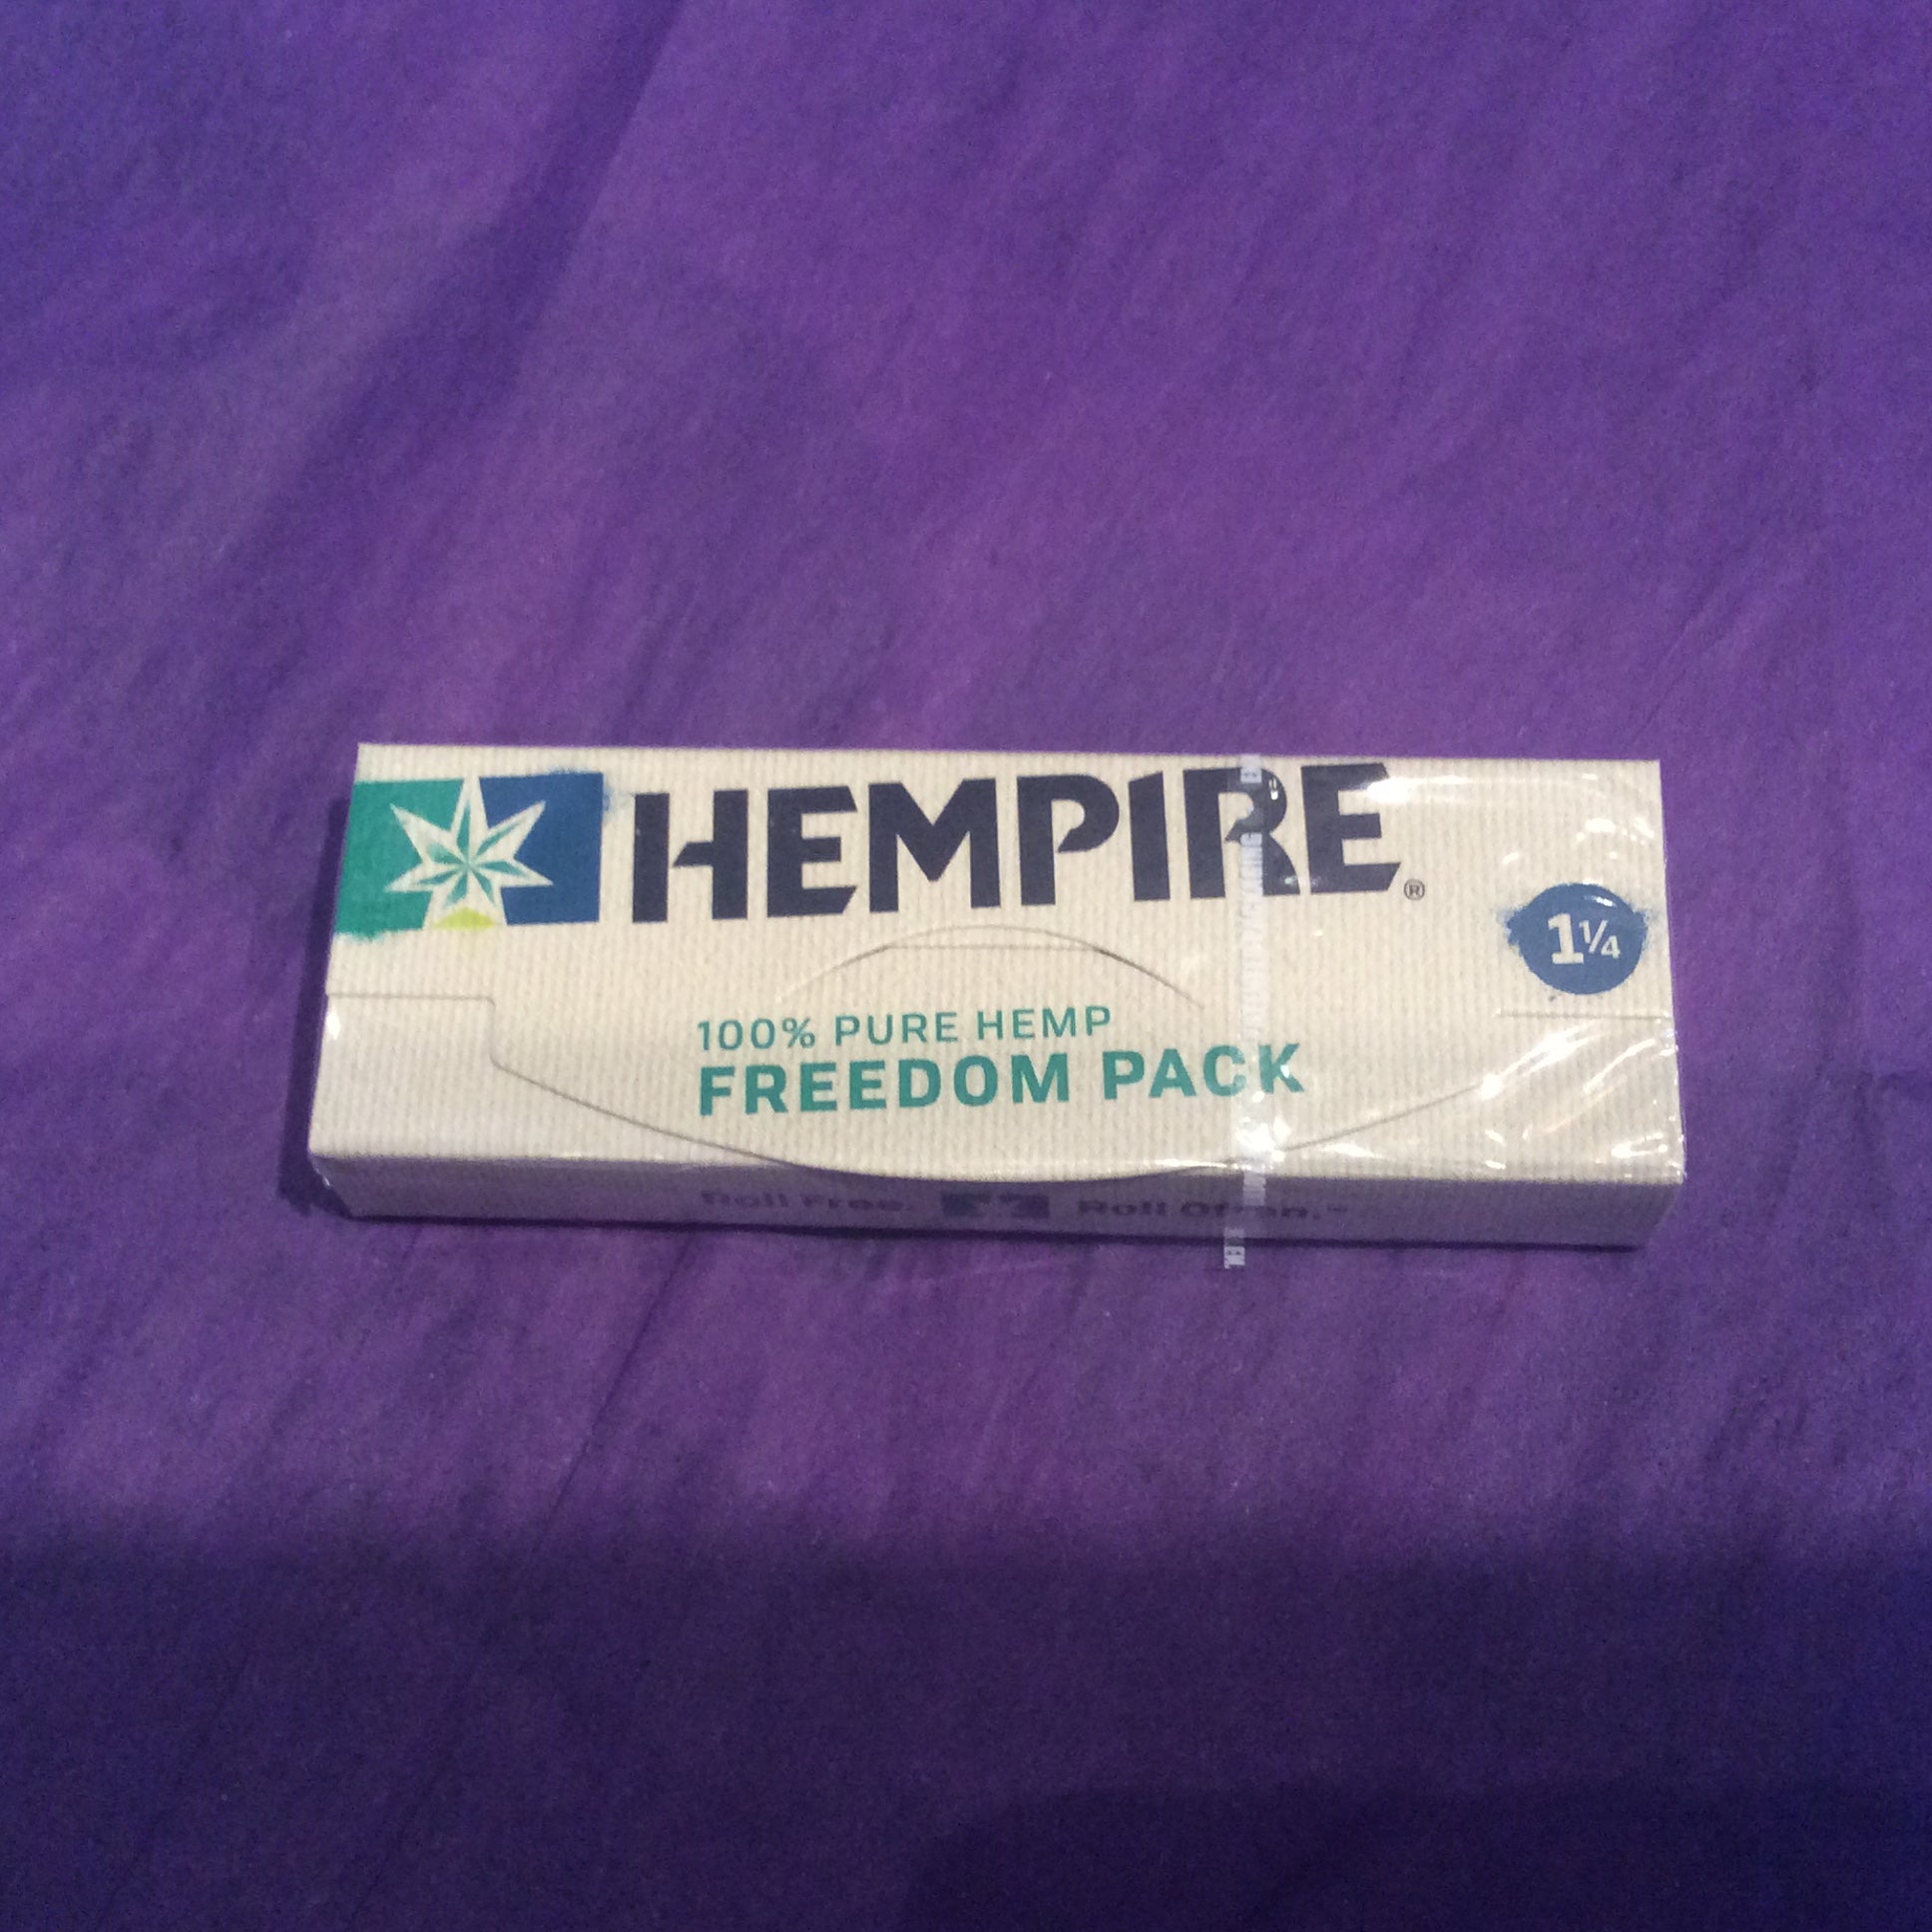 Hempire - Freedom Pack Papers and Tips / 1 1/4